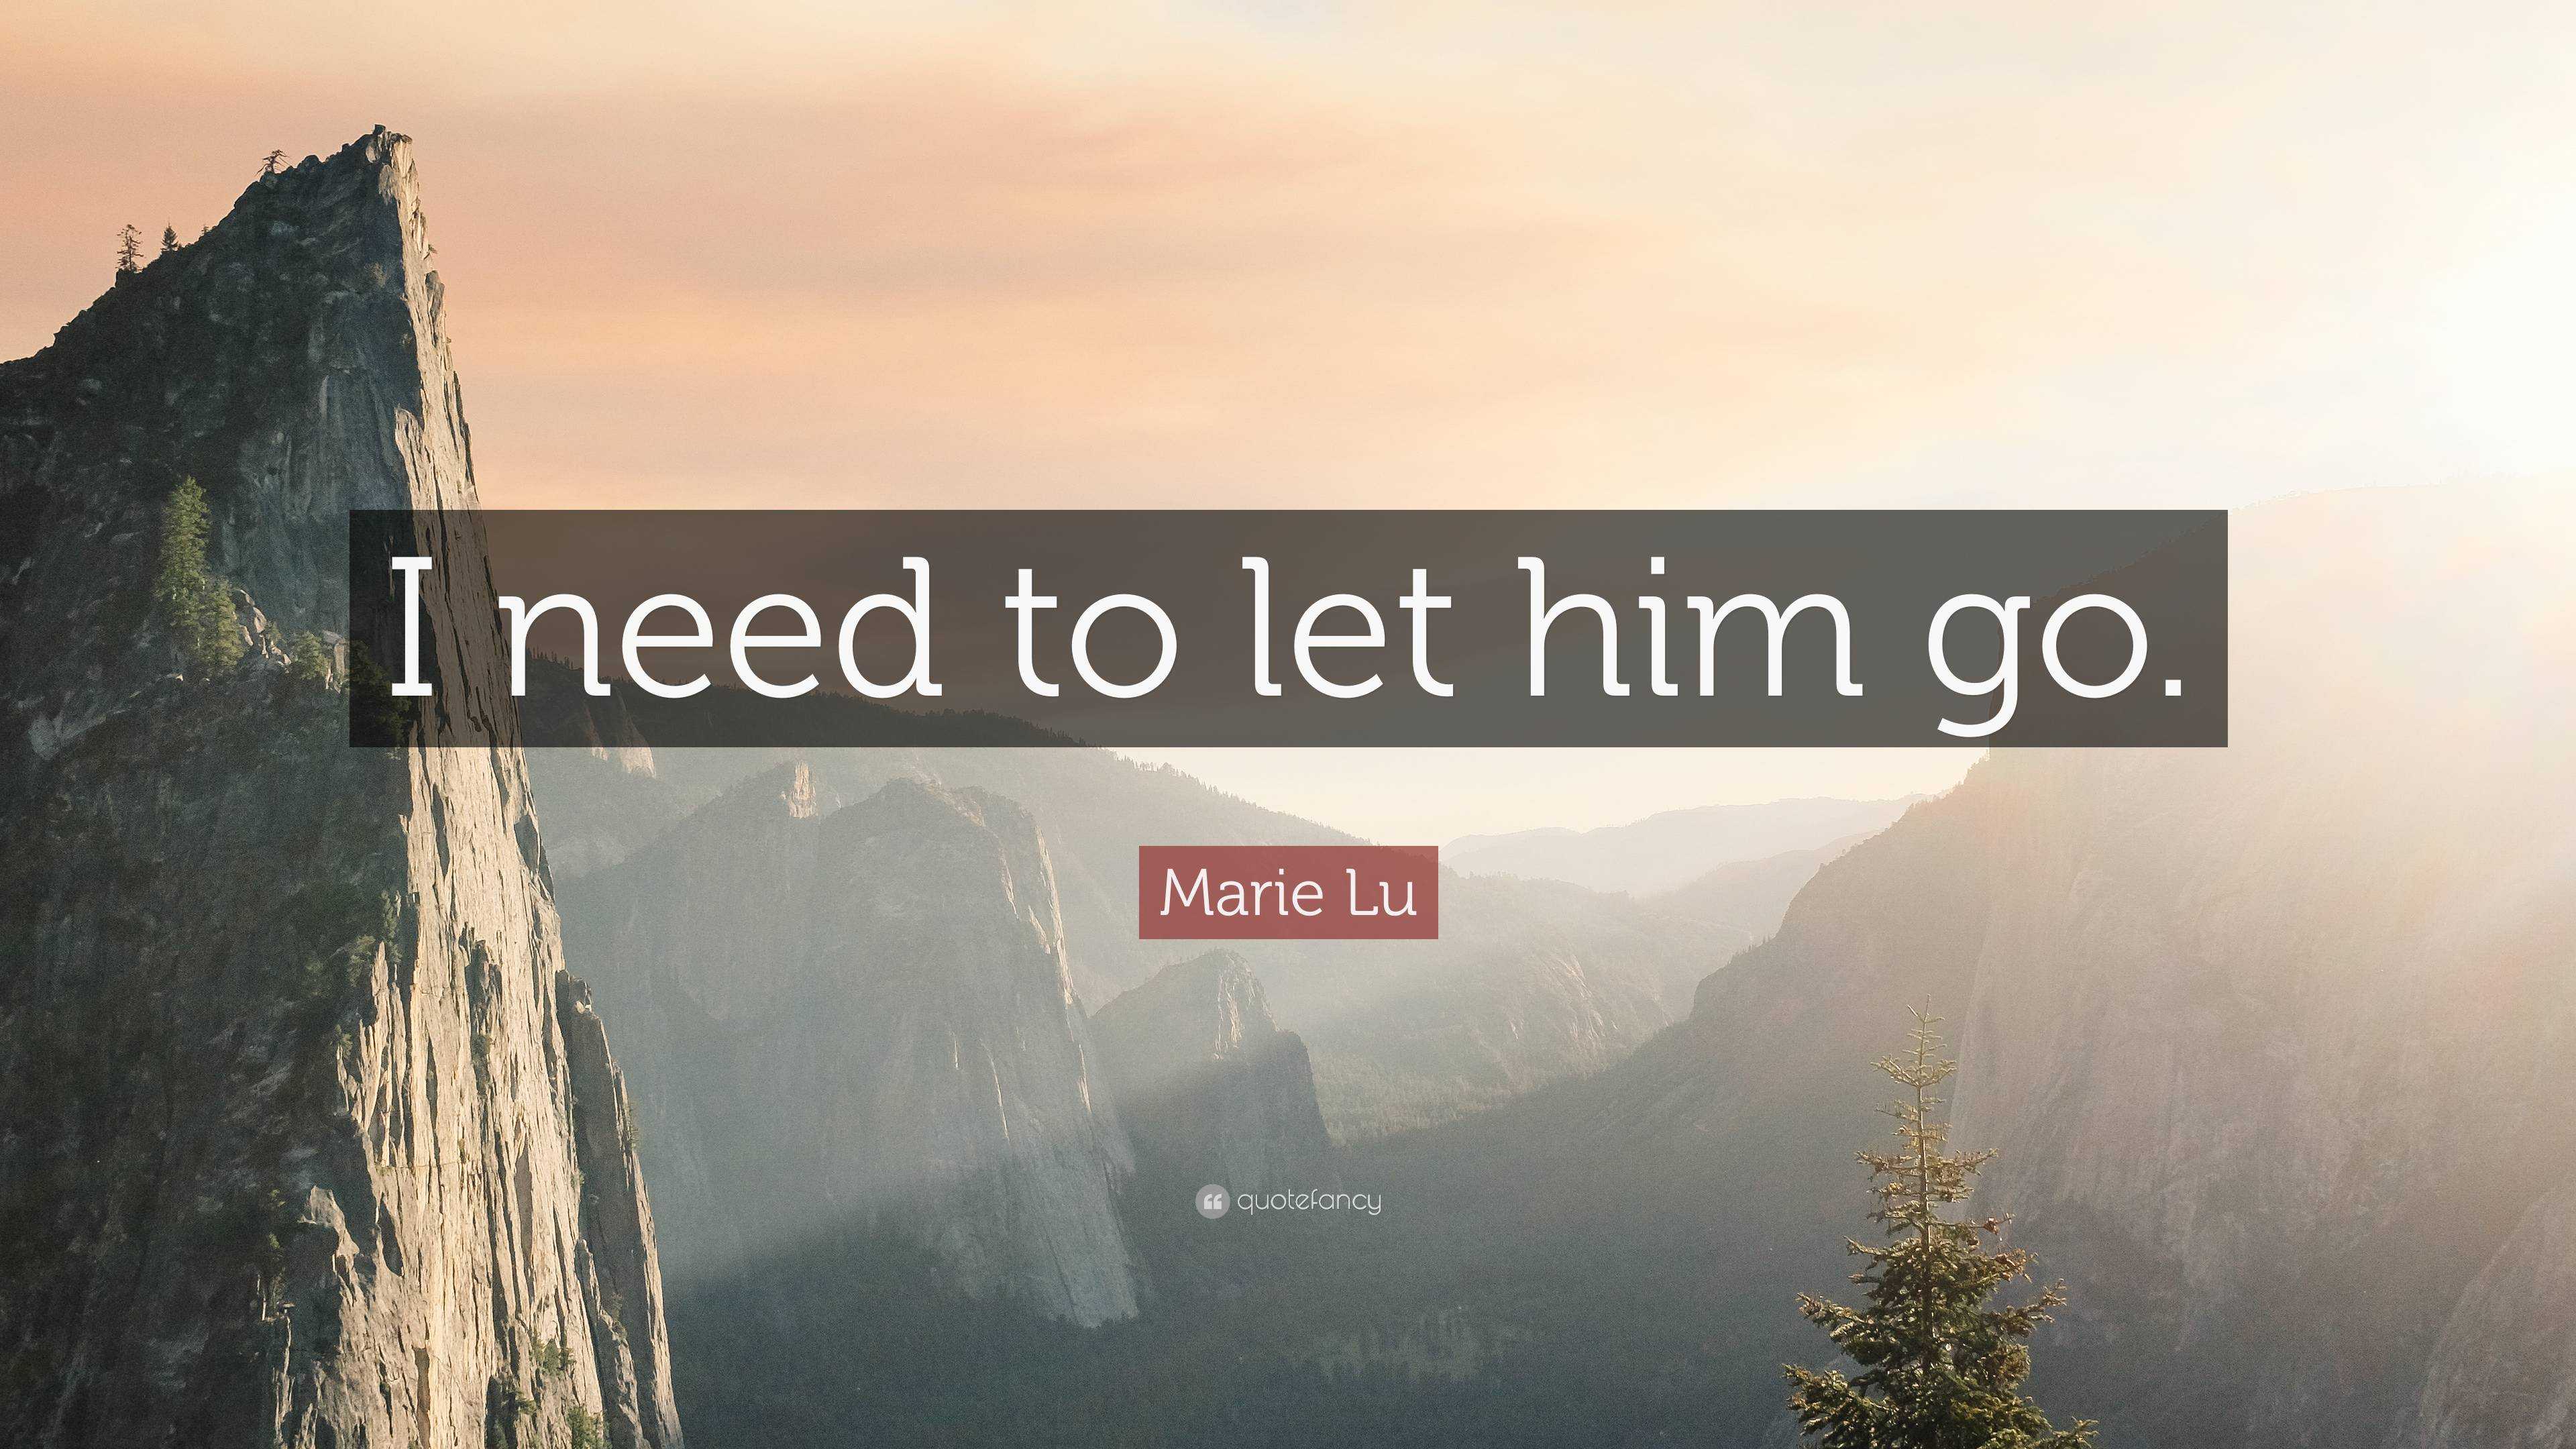 Marie Lu Quote: “I need to let him go.”